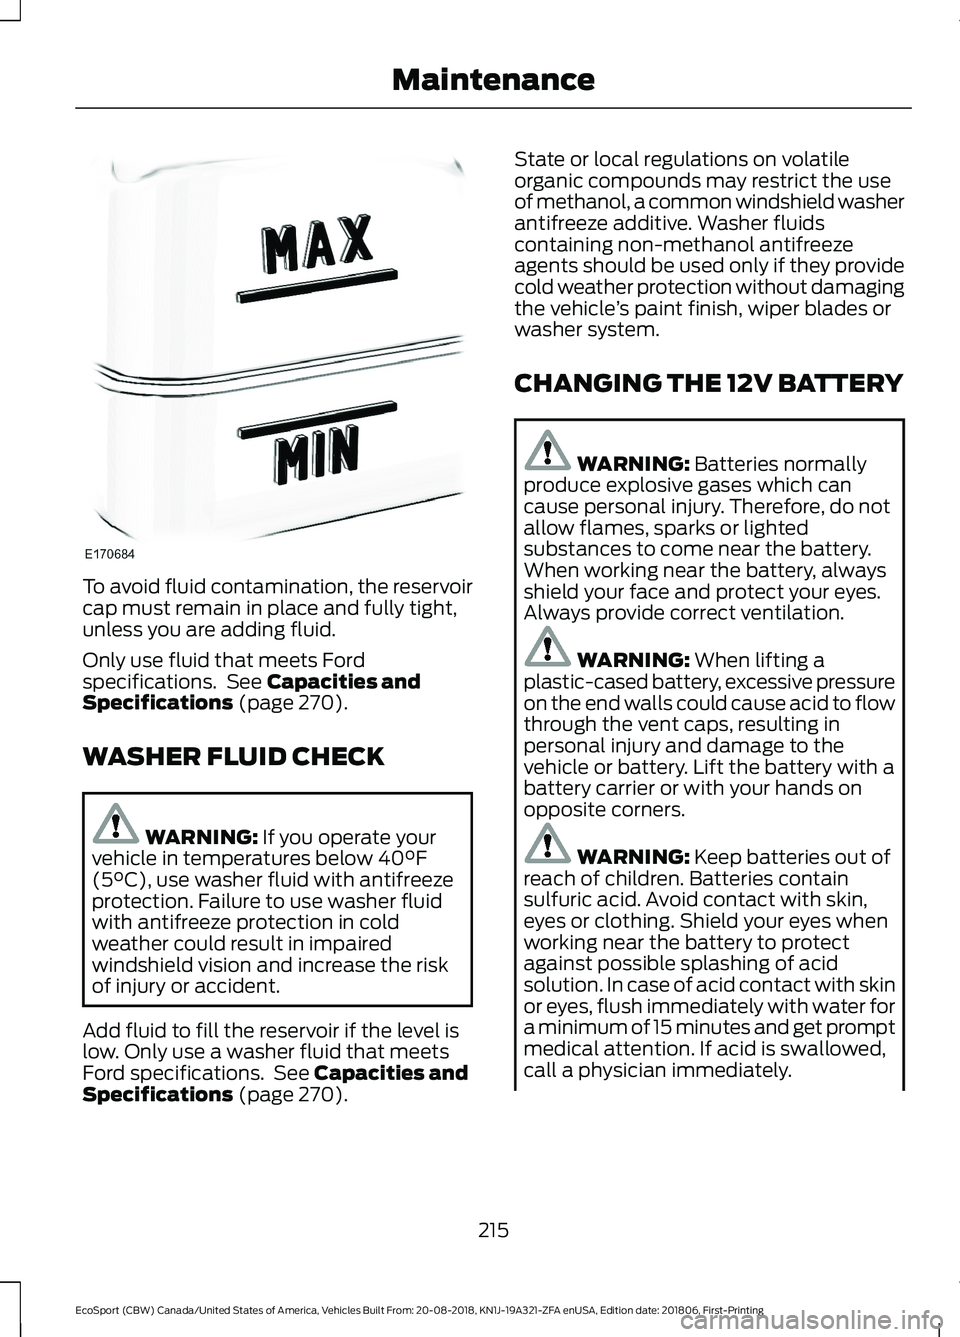 FORD ECOSPORT 2019  Owners Manual To avoid fluid contamination, the reservoircap must remain in place and fully tight,unless you are adding fluid.
Only use fluid that meets Fordspecifications. See Capacities andSpecifications (page 27